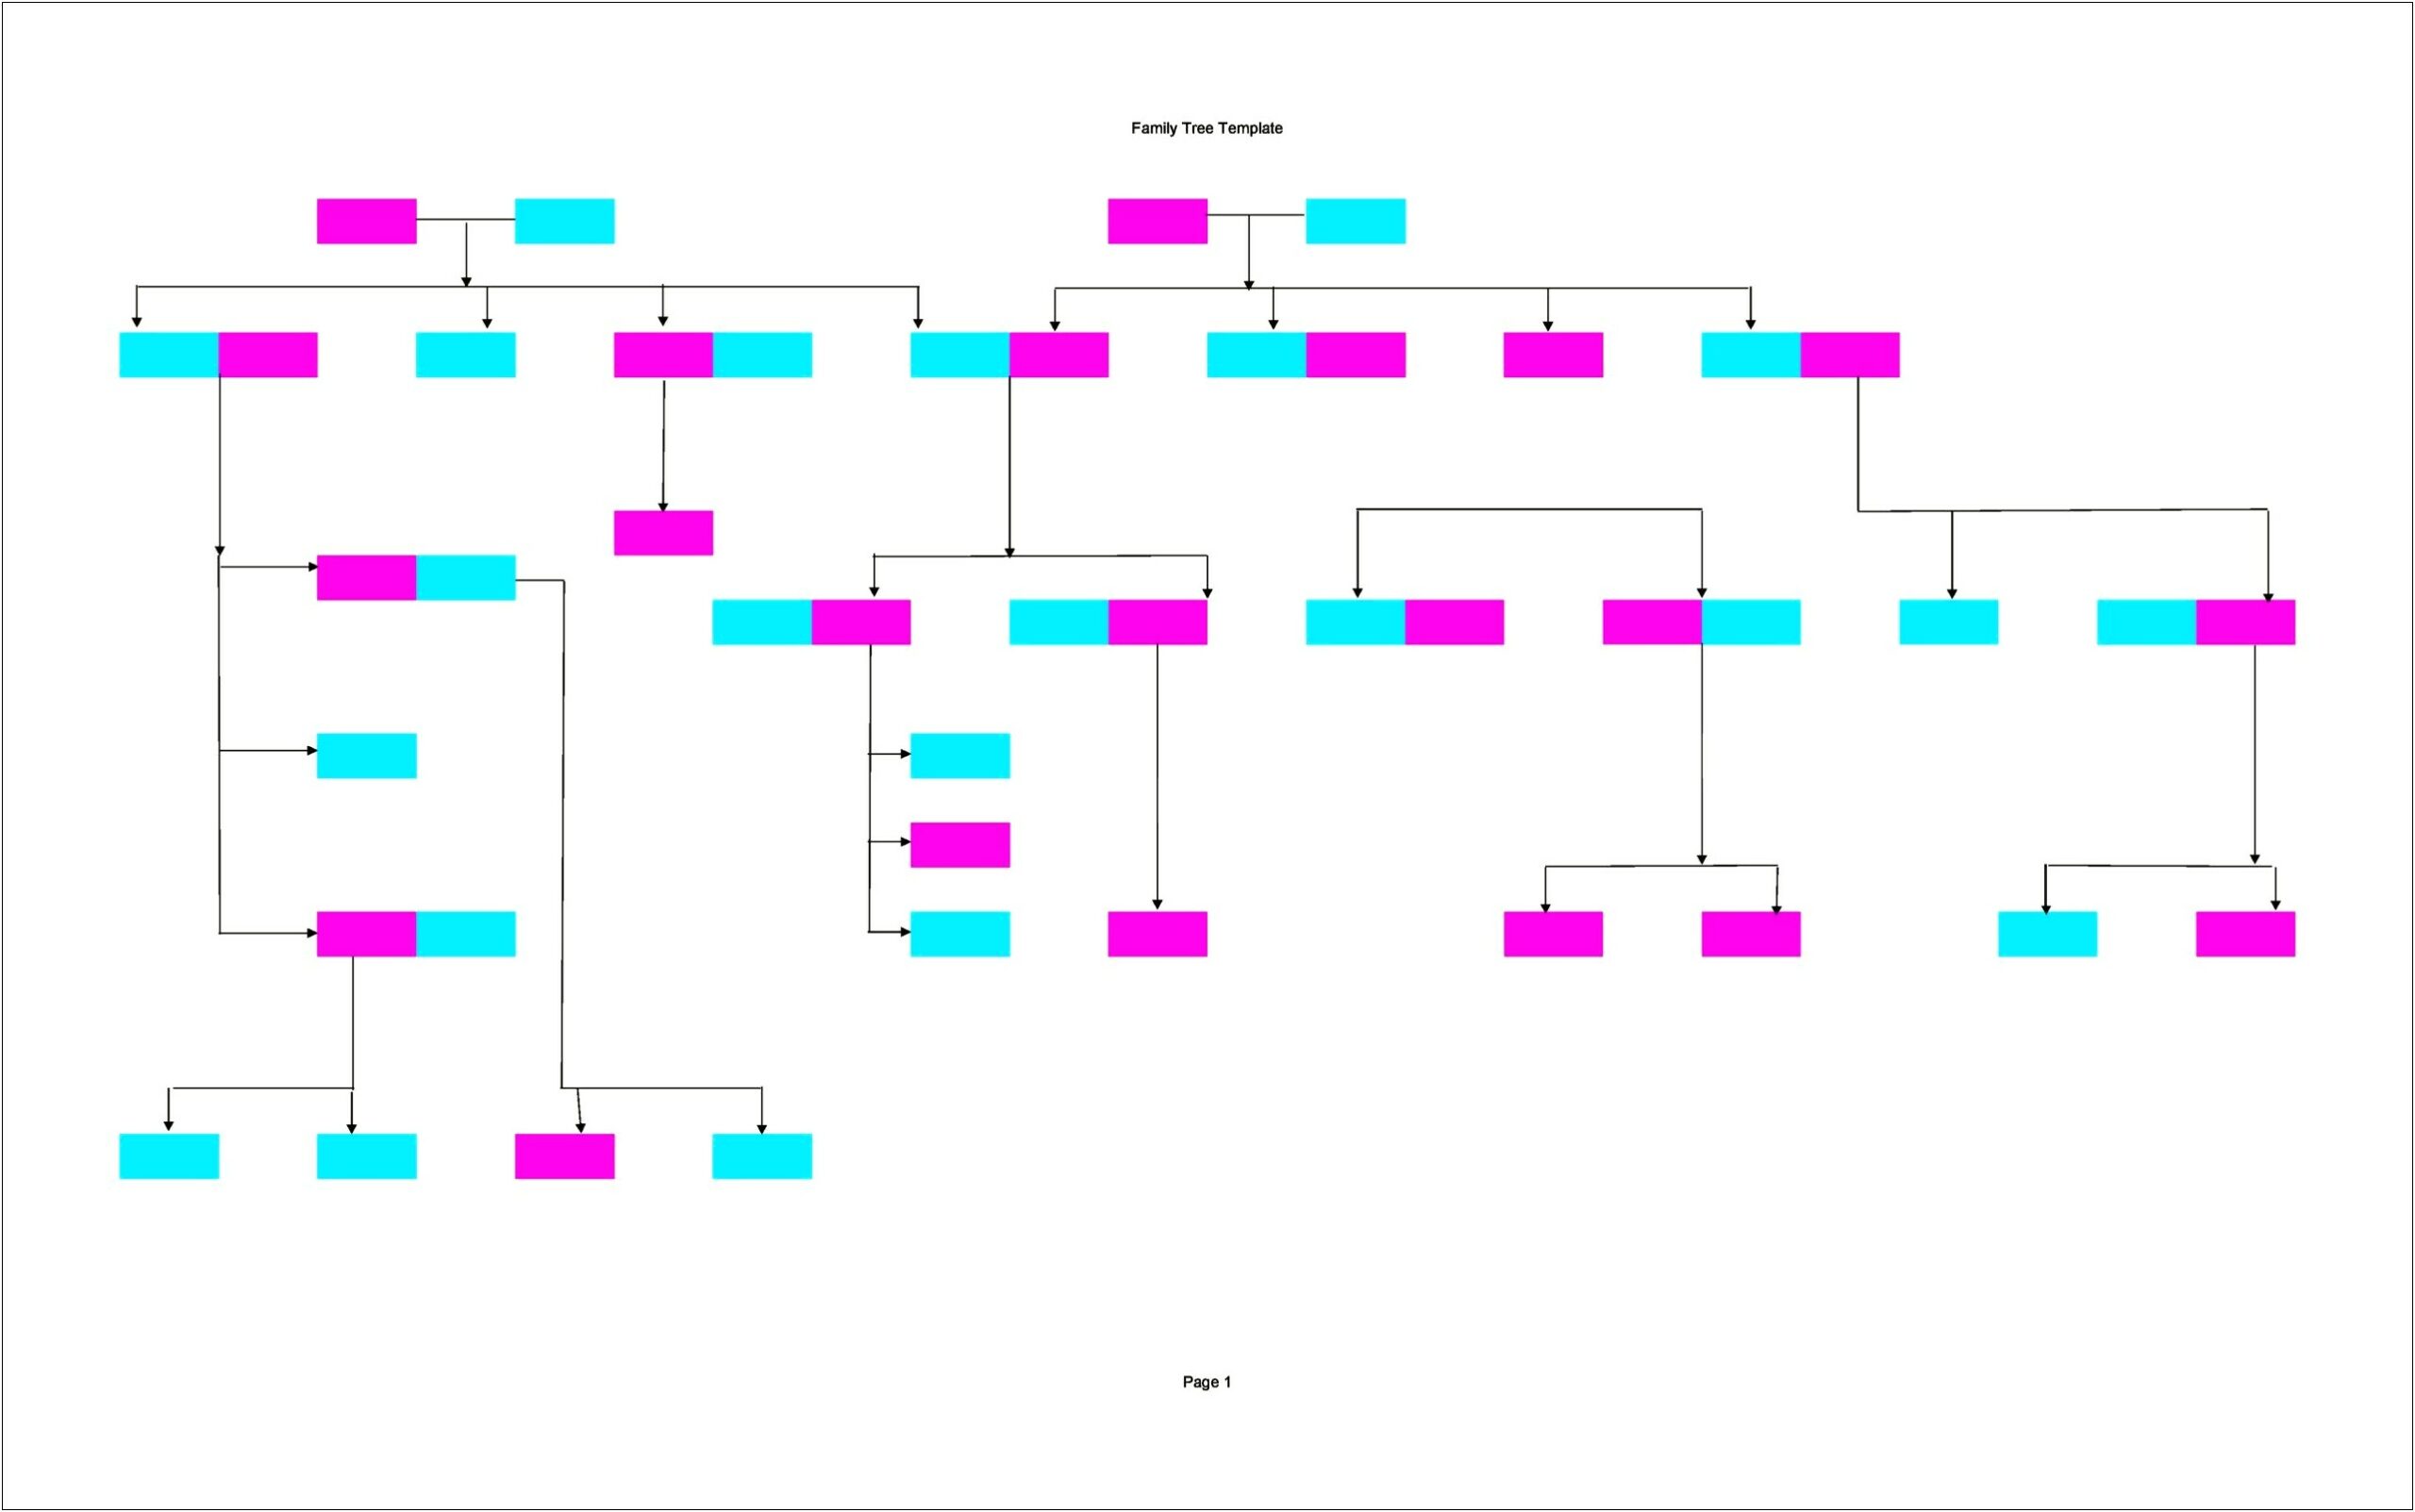 Photoshop Family Tree Template Free Download